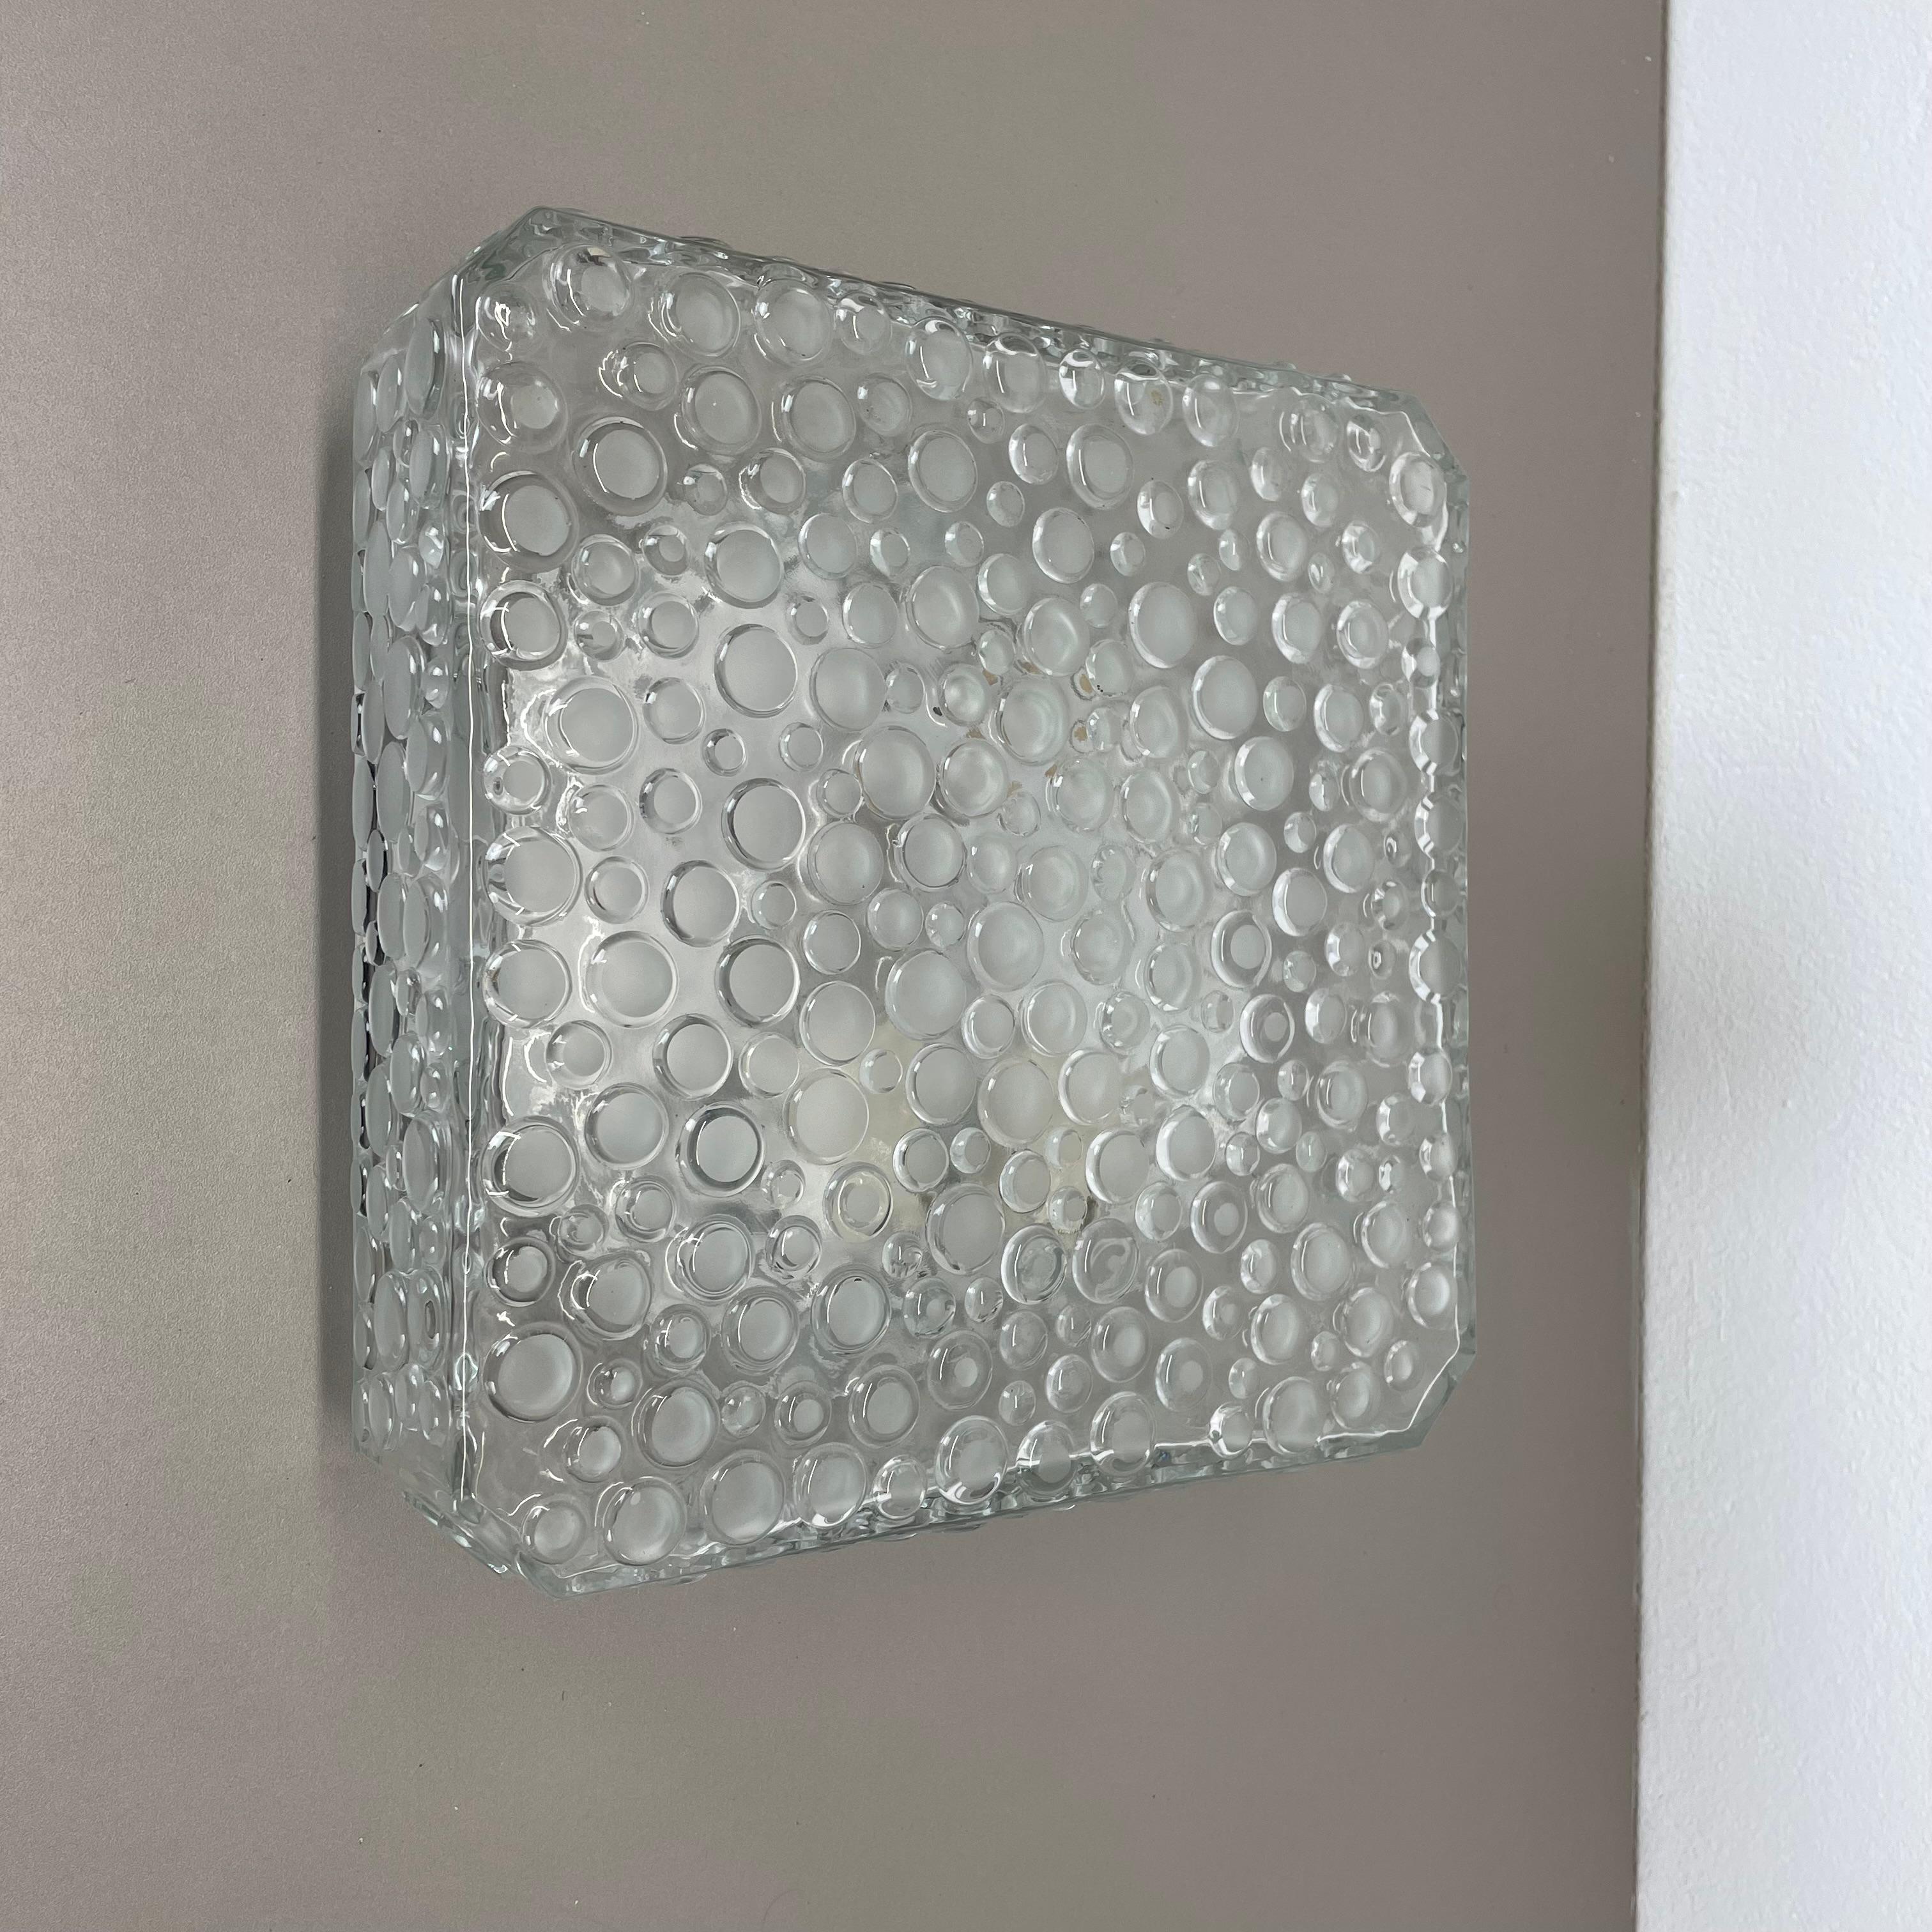 Article:

Wall light or ceiling light


Producer:

Hustadt Lights, Germany.



Origin:

Germany.



Age:

1970s.



Description:

Original 1970s modernist German wall light, ceiling light made of heavy structured bubble glass with a solid meta wall